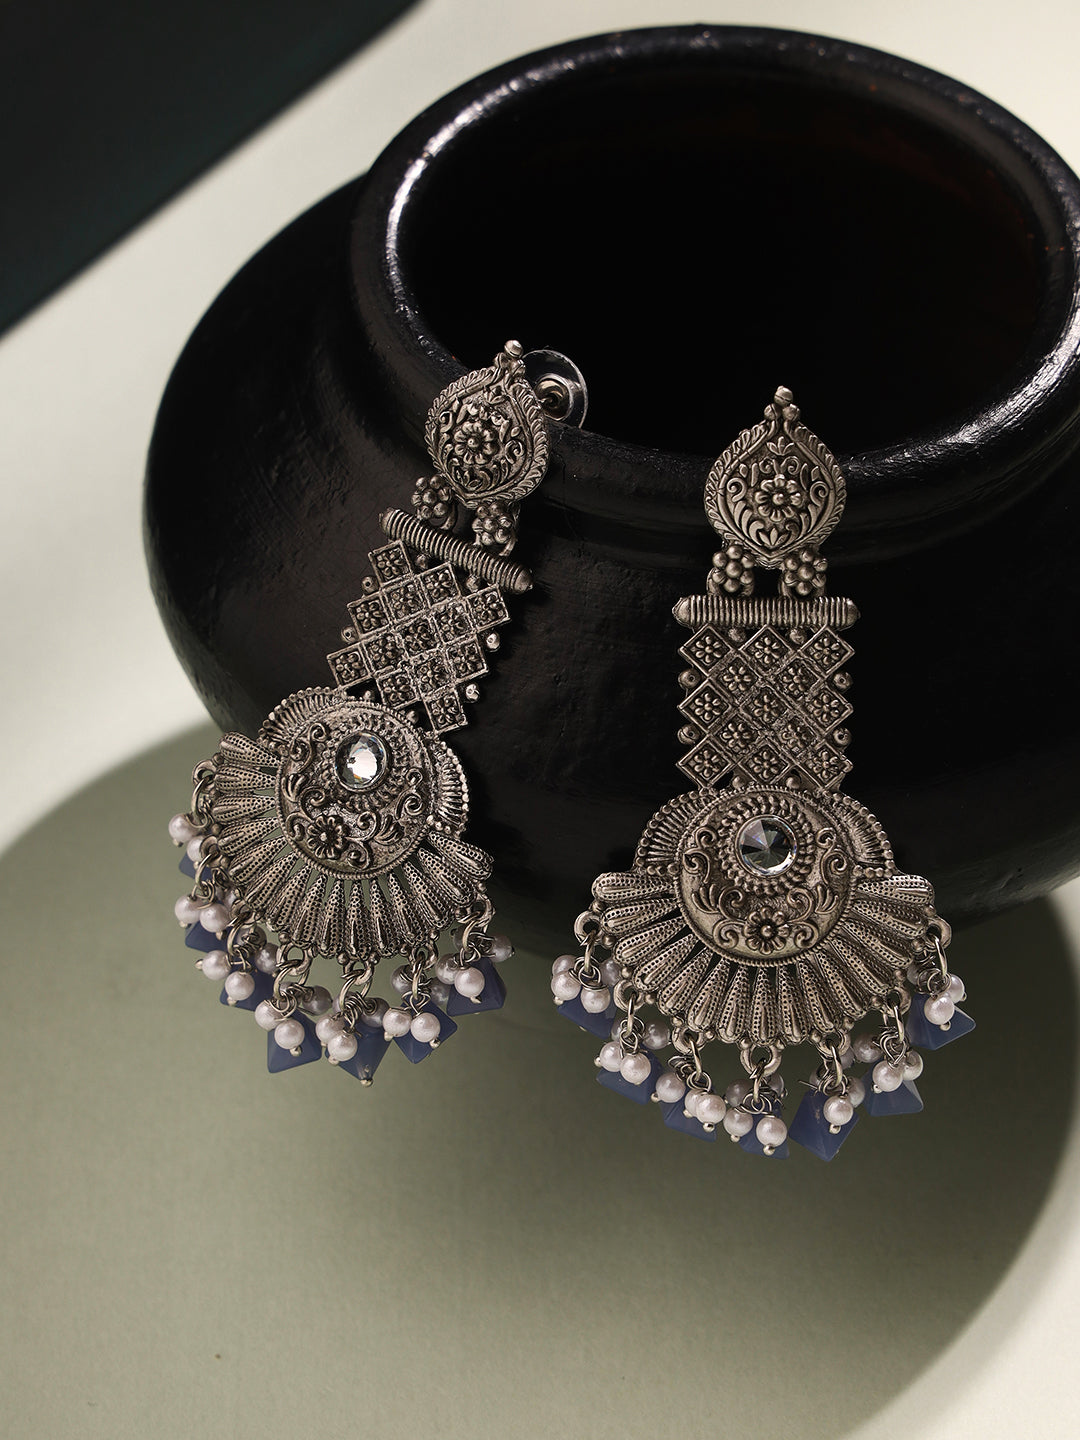 Priyaasi Sophisticated Tribal Earrings with Blue and White Beads